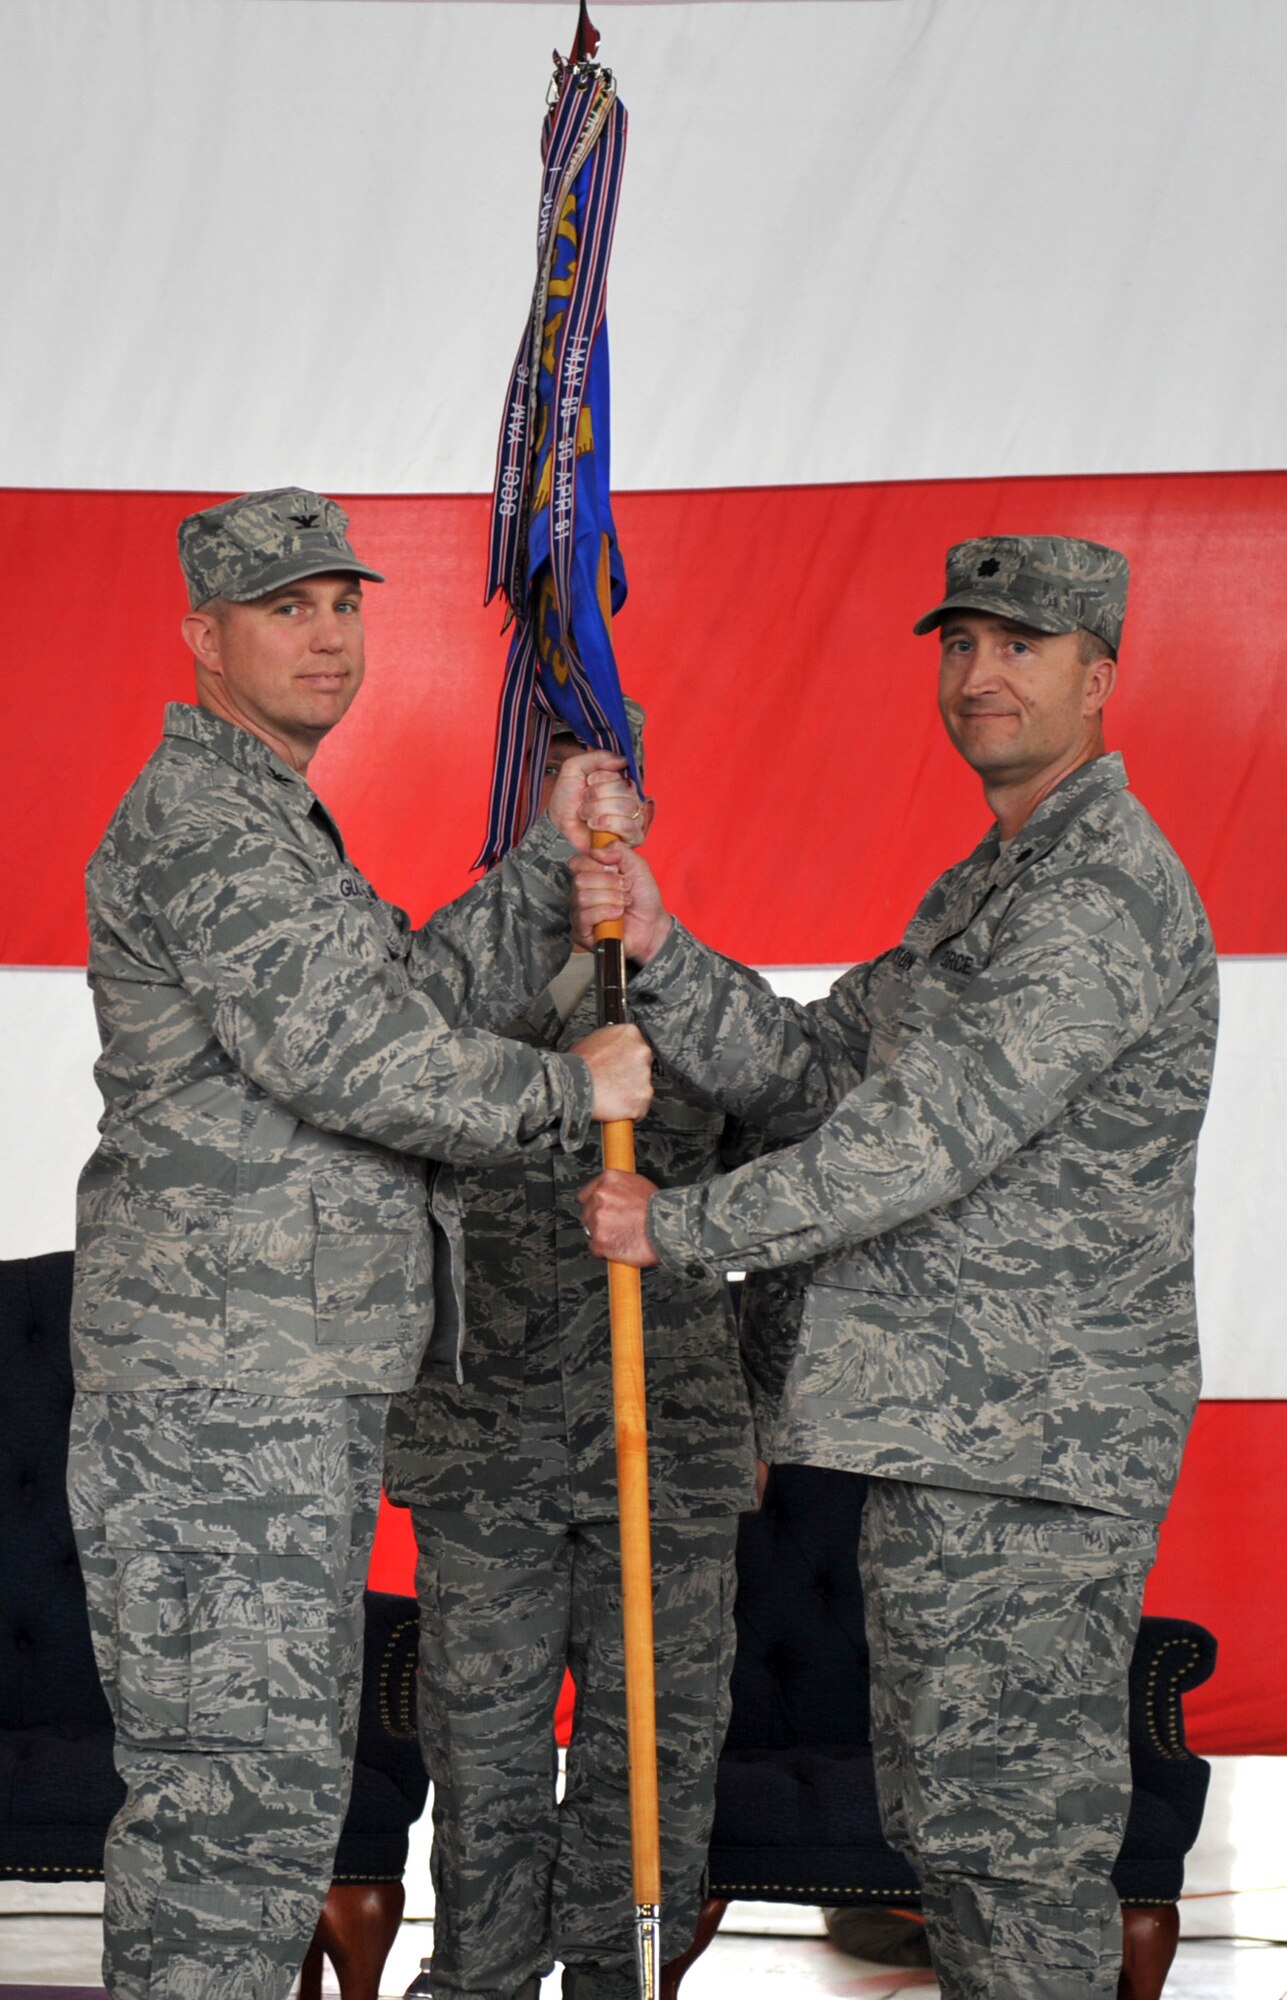 With 552nd Air Control Wing Commander Col. Gregory M. Guillot, left, presiding, Lt. Col. Shayne R. Yorton took command of the 726th Air Control “Hard Rock” Squadron from Lt. Col. Trent Carpenter during a change of command ceremony Aug. 10 at Mountain Home Air Force Base, Idaho. Colonel Yorton had previously served as the Director of Operations for the 726th ACS, a geographically separated unit that falls under the 552nd ACW at Tinker. (U.S. Air Force photo by Airman 1st Class Heather Hayward)